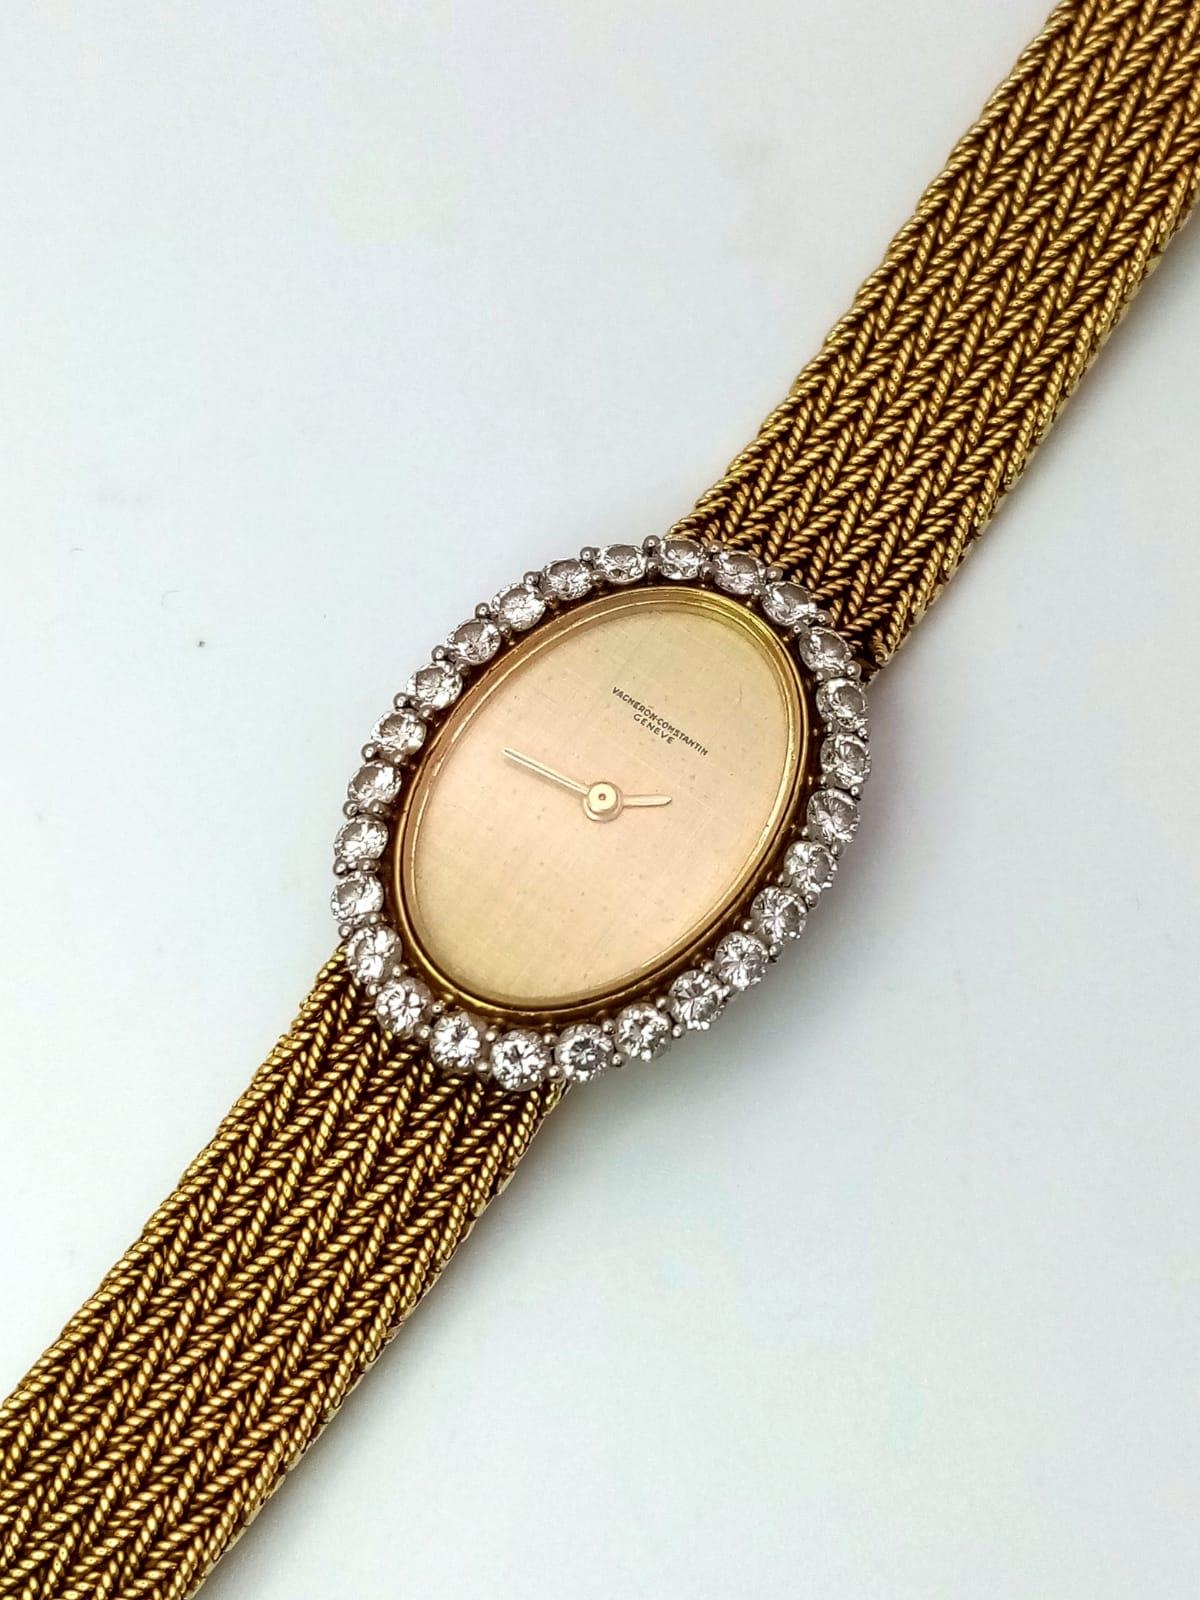 A Vacheron-Constantin 18K Yellow Gold and Diamond Ladies Watch. Gold bracelet and oval case - - Image 7 of 9